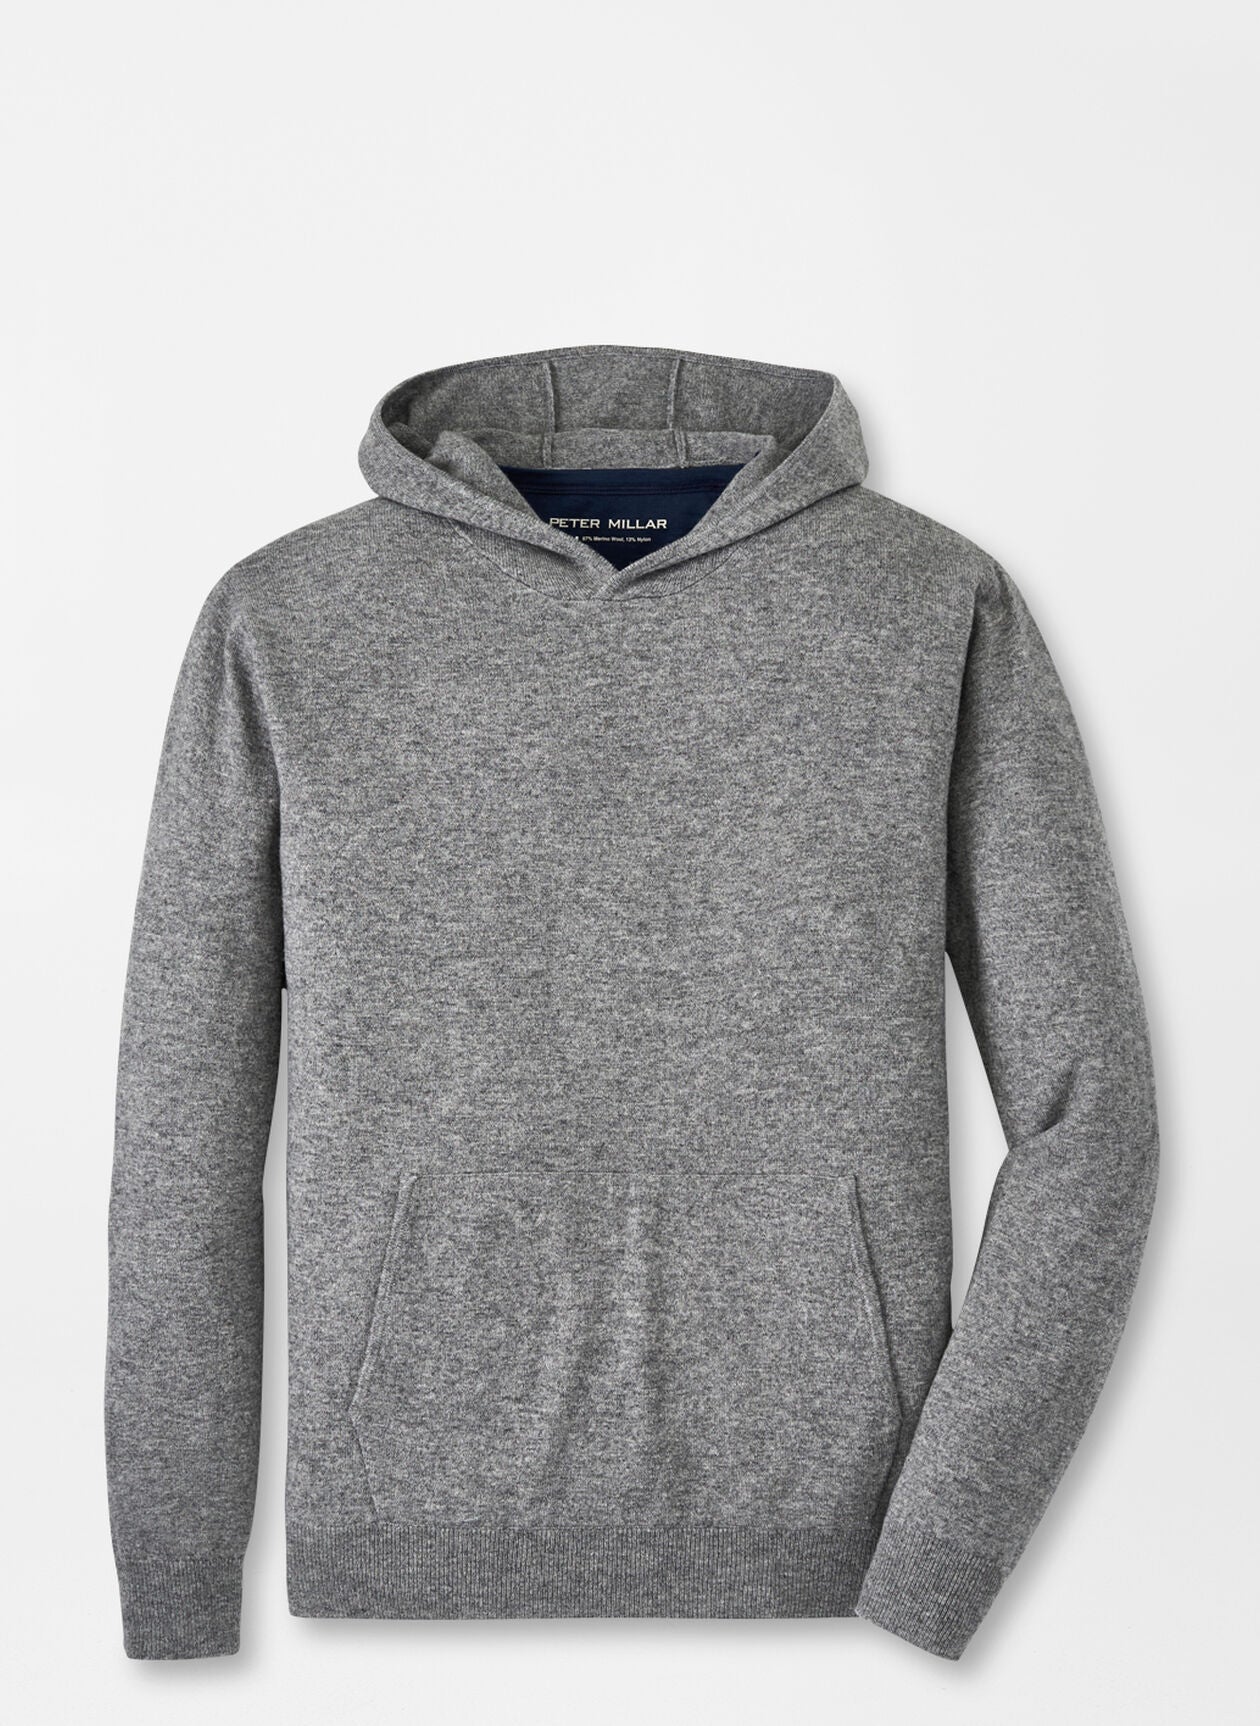 PETER MILLAR CONWAY WOOL CASHMERE POPOVER HOODIE - GALE GREY